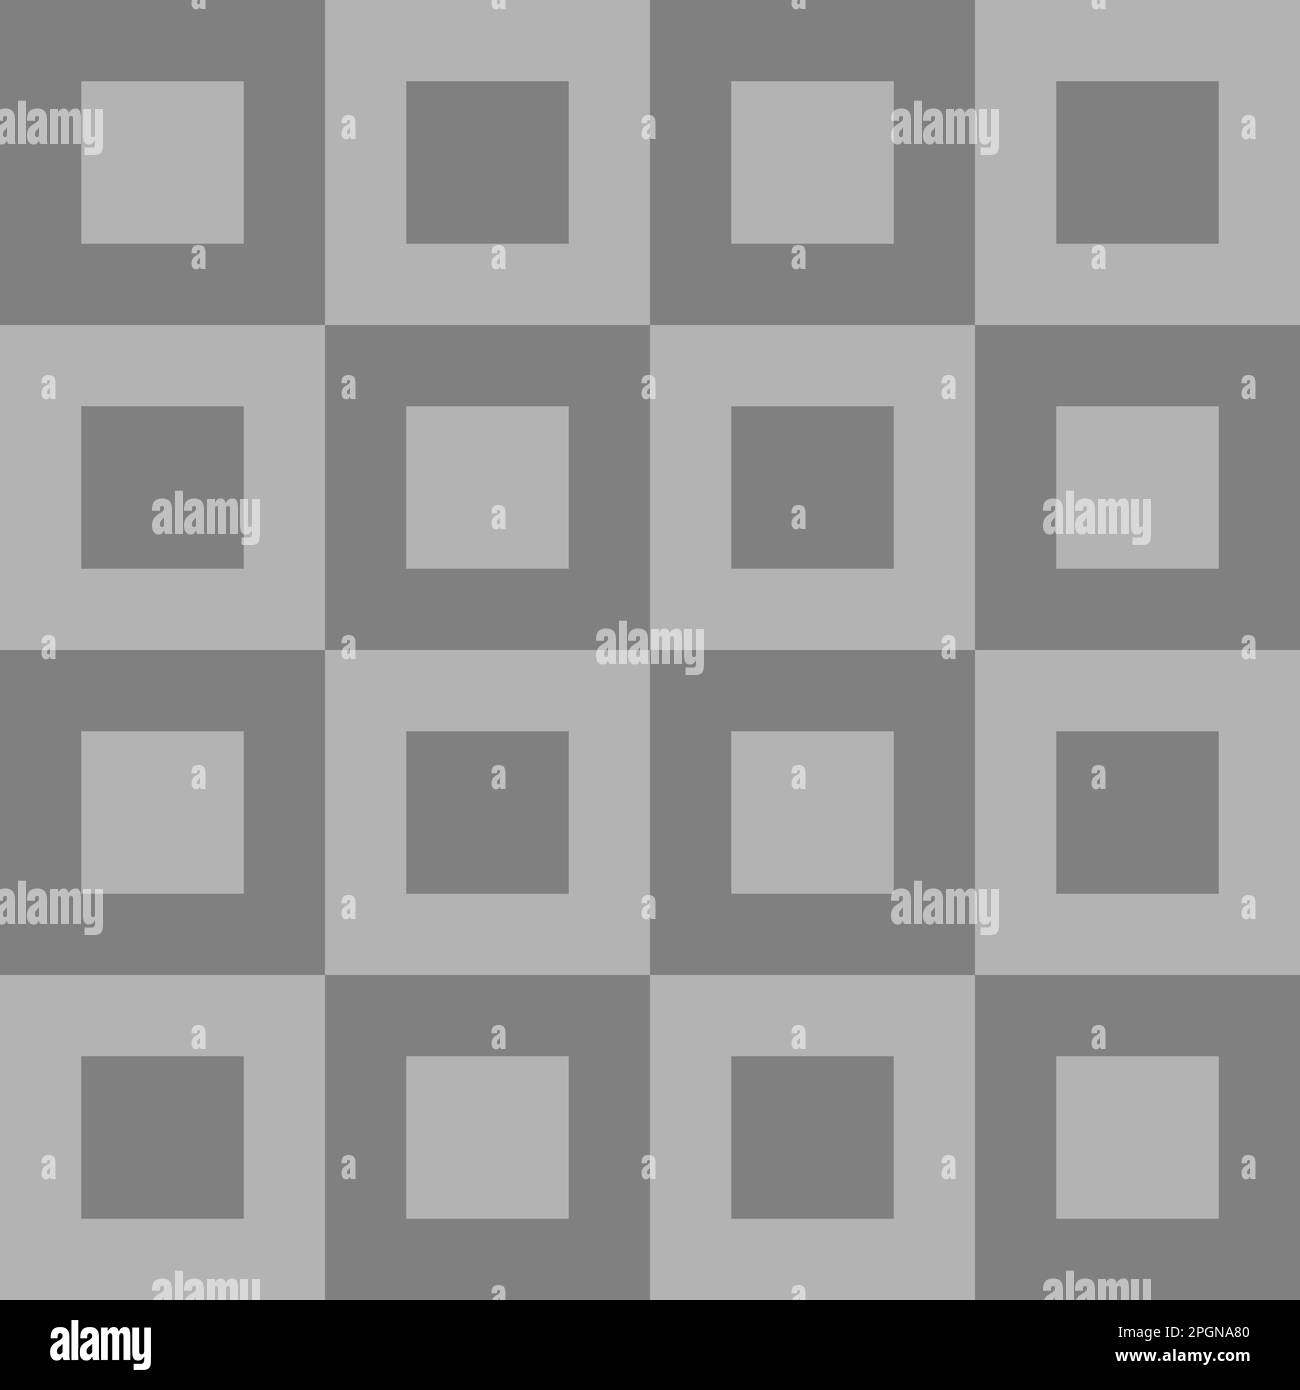 Seamless vector graphic of squares in two shades of grey forming a geometric pattern. Stock Vector